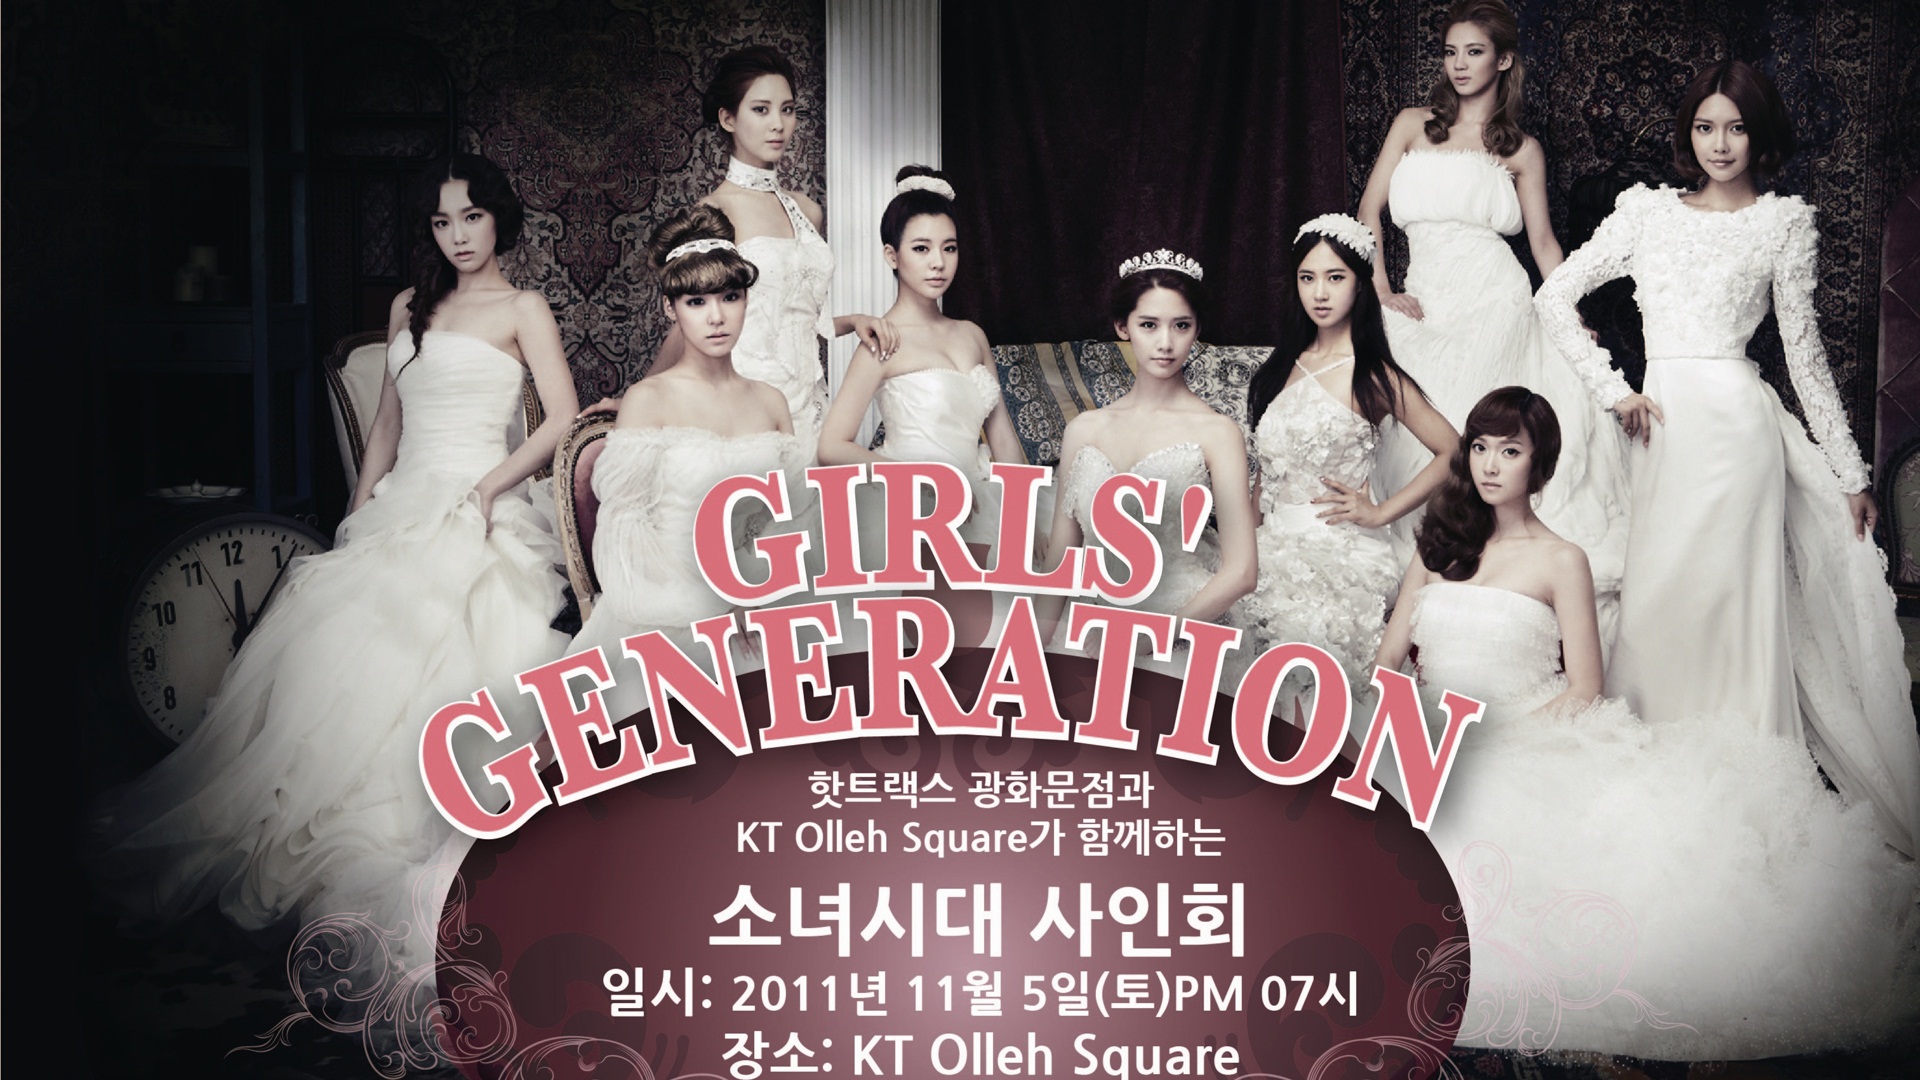 Girls Generation latest HD wallpapers collection #8 - 1920x1080